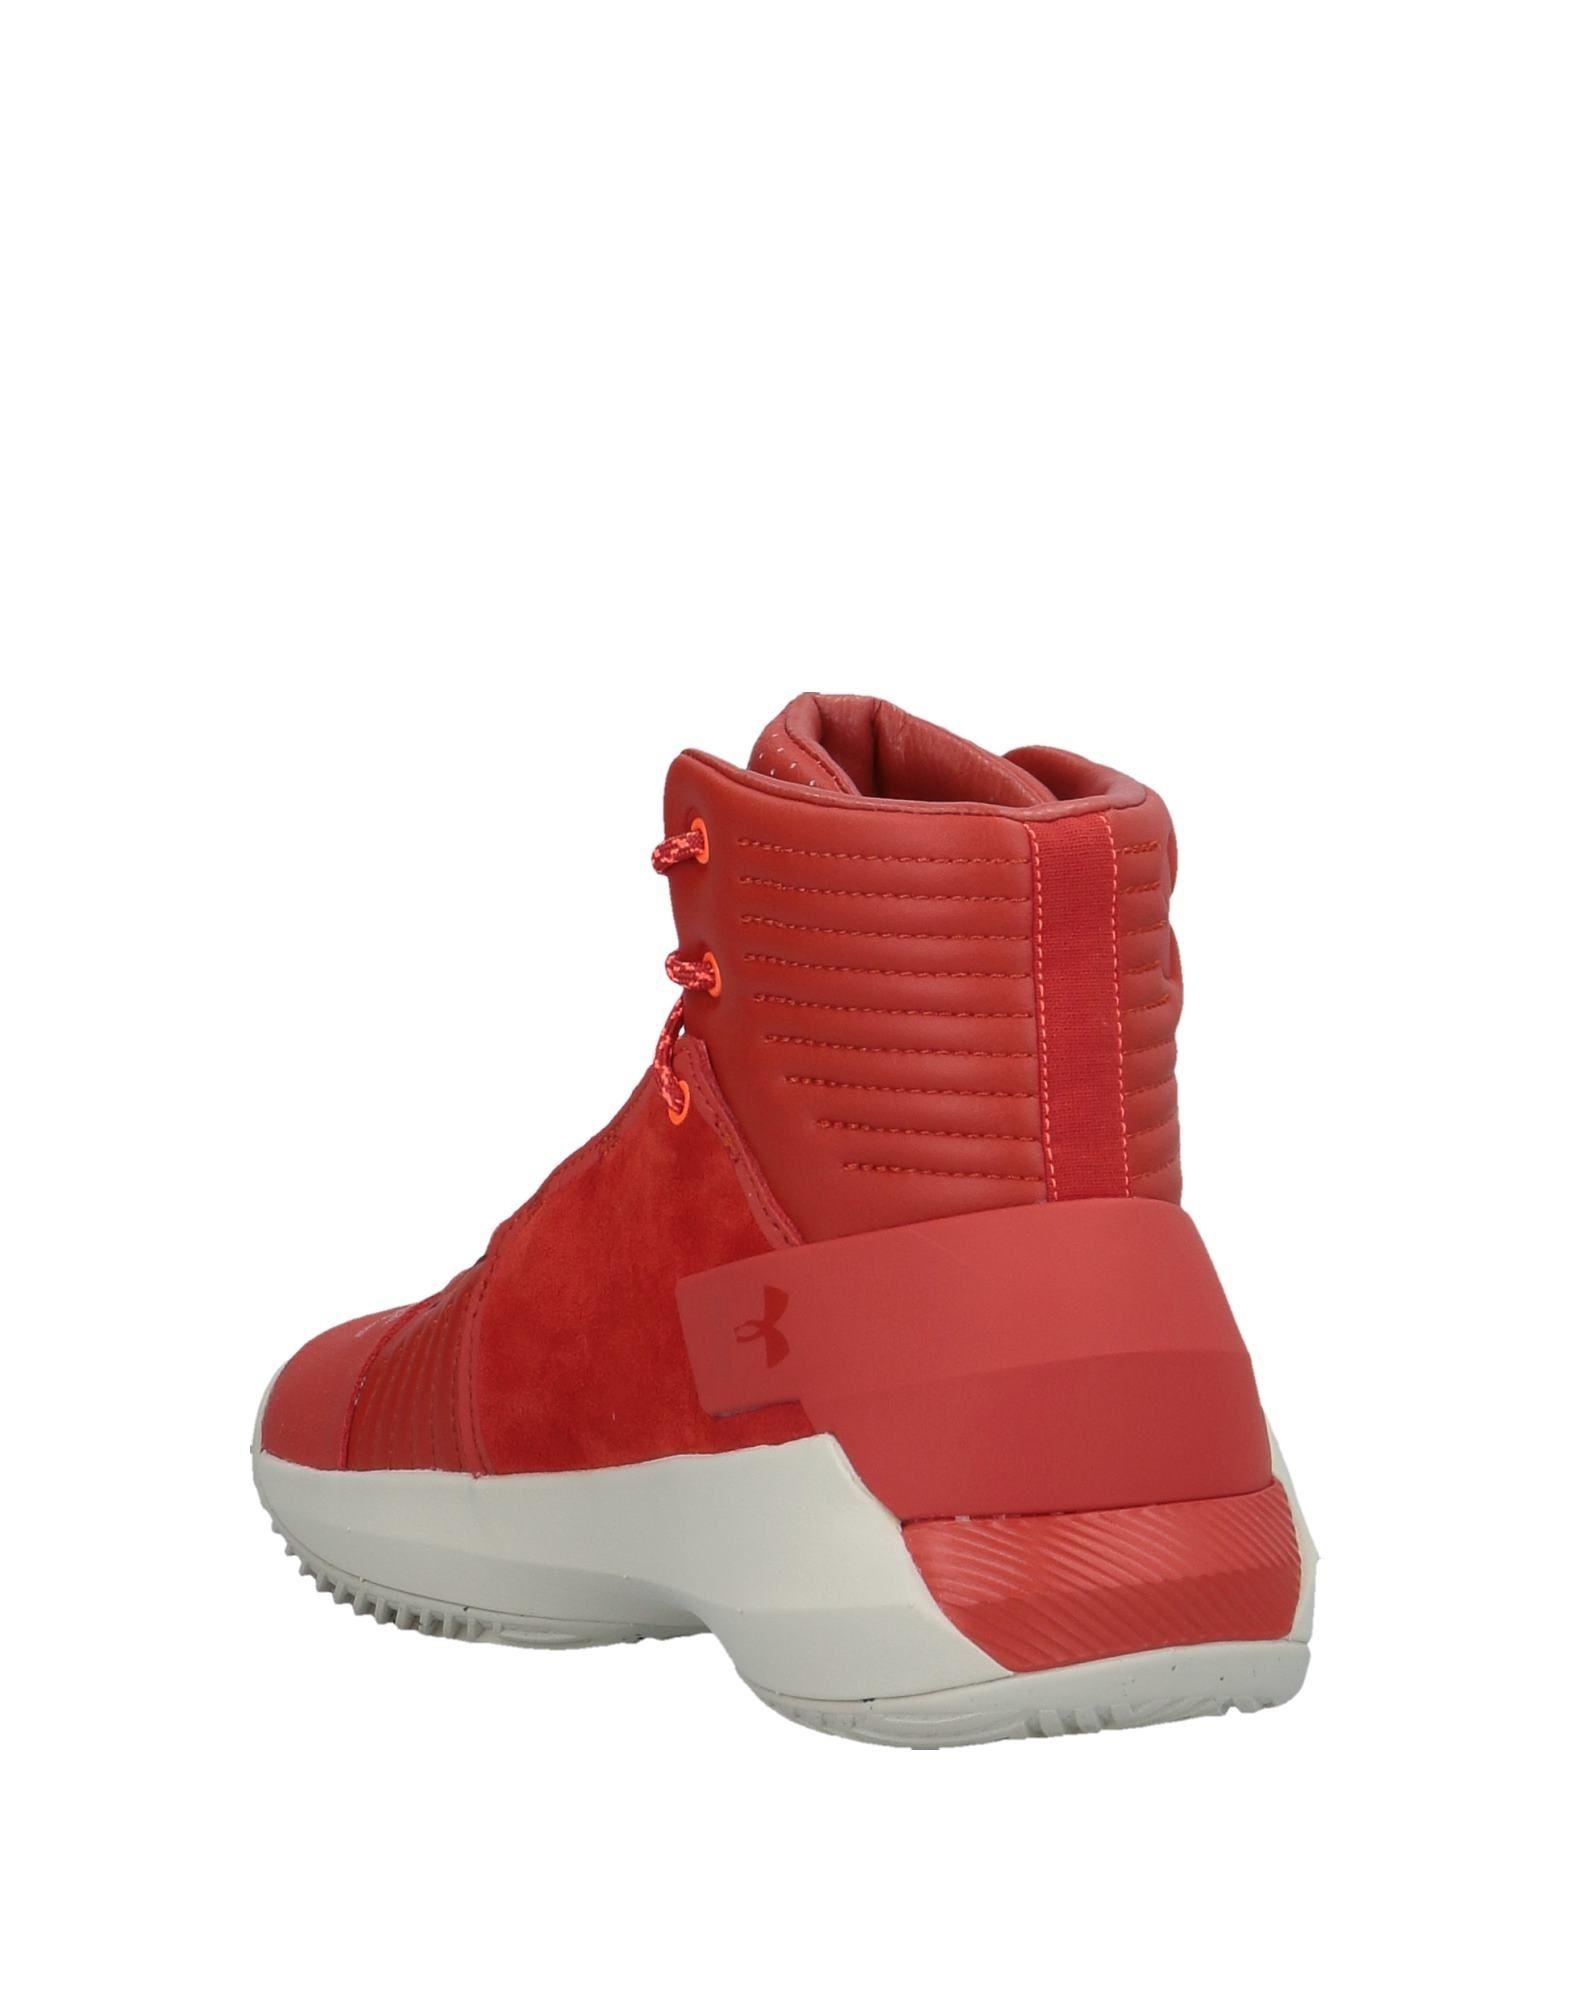 under armour red high tops